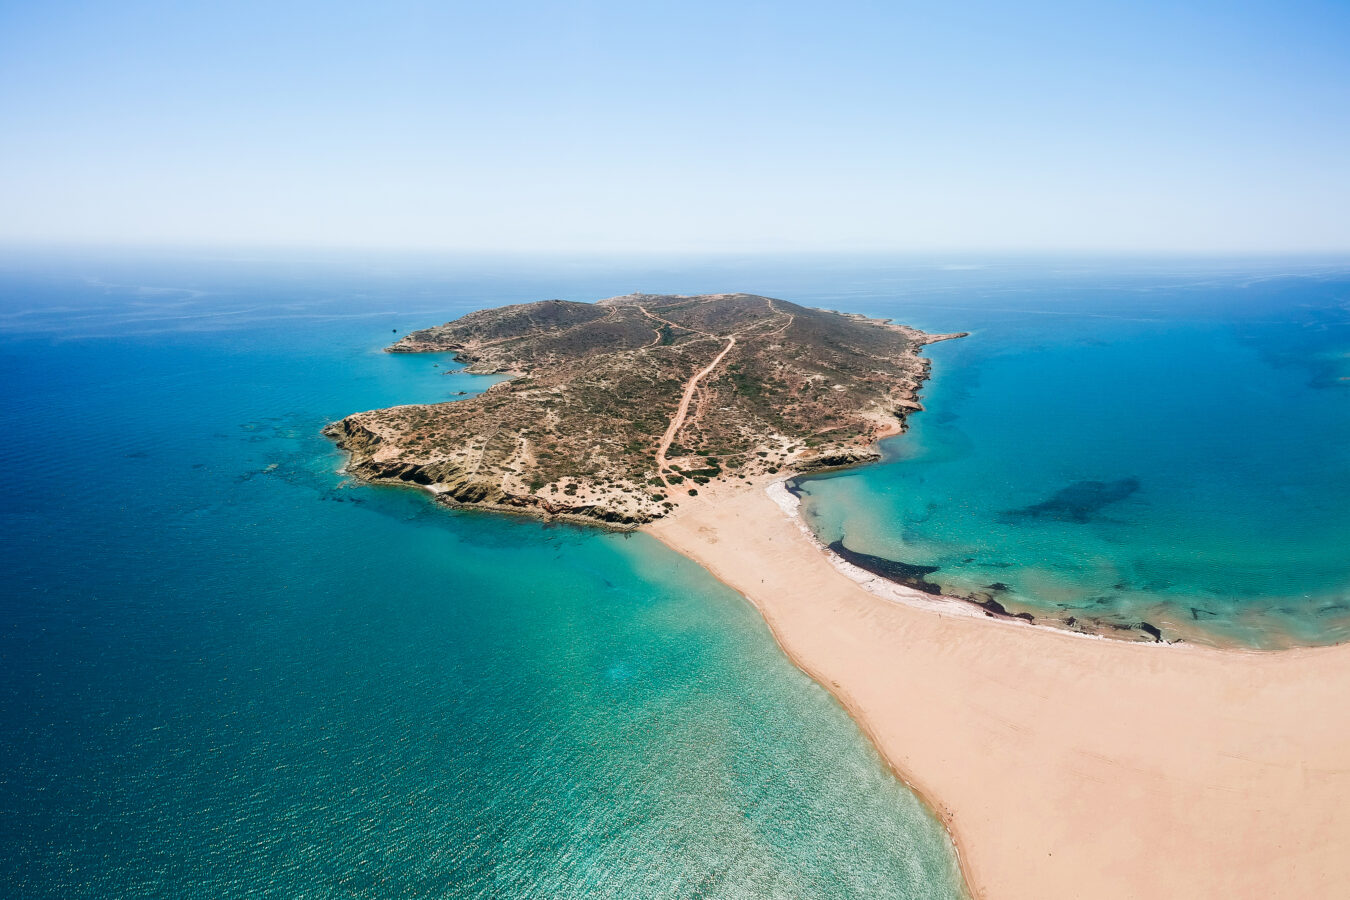 Aerial view of Prasonissi, one the highlights of South Rhodes